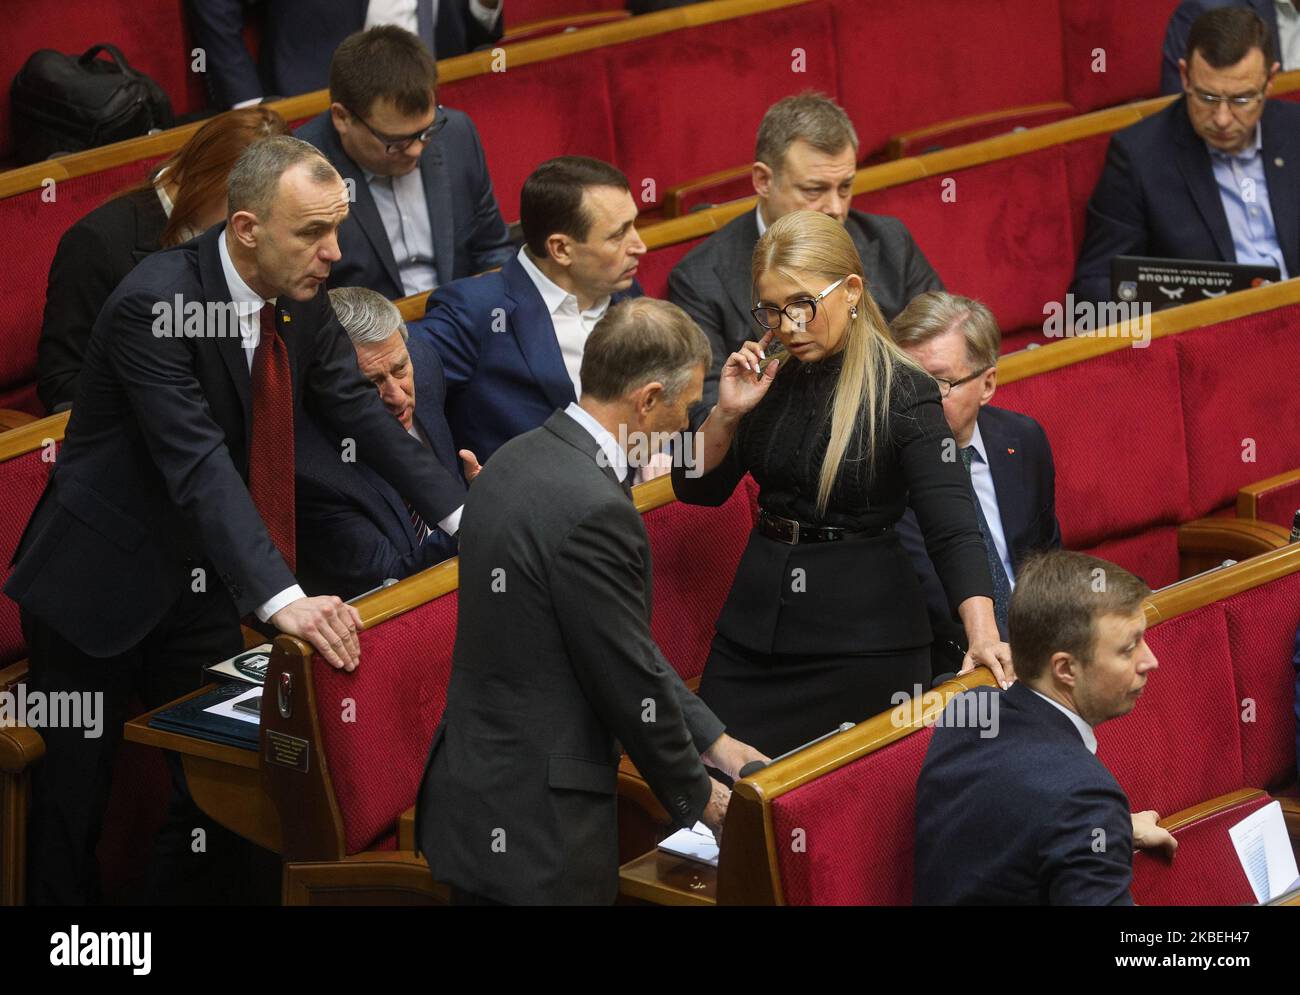 Batkivshchyna party leader Yulia Tymoshenko (C) ttends lawmakers work at the session of the Verkhovna Rada in Kyiv, Ukraine, January 14, 2020. The Verkhovna Rada of Ukraine looks forward to the Islamic Republic of Iran official apology for the downing of the Ukrainian aircraft and the death of its crew and passengers, and calls on the Islamic Republic of Iran to acknowledge its full responsibility for the incident (Photo by Sergii Kharchenko/NurPhoto) Stock Photo